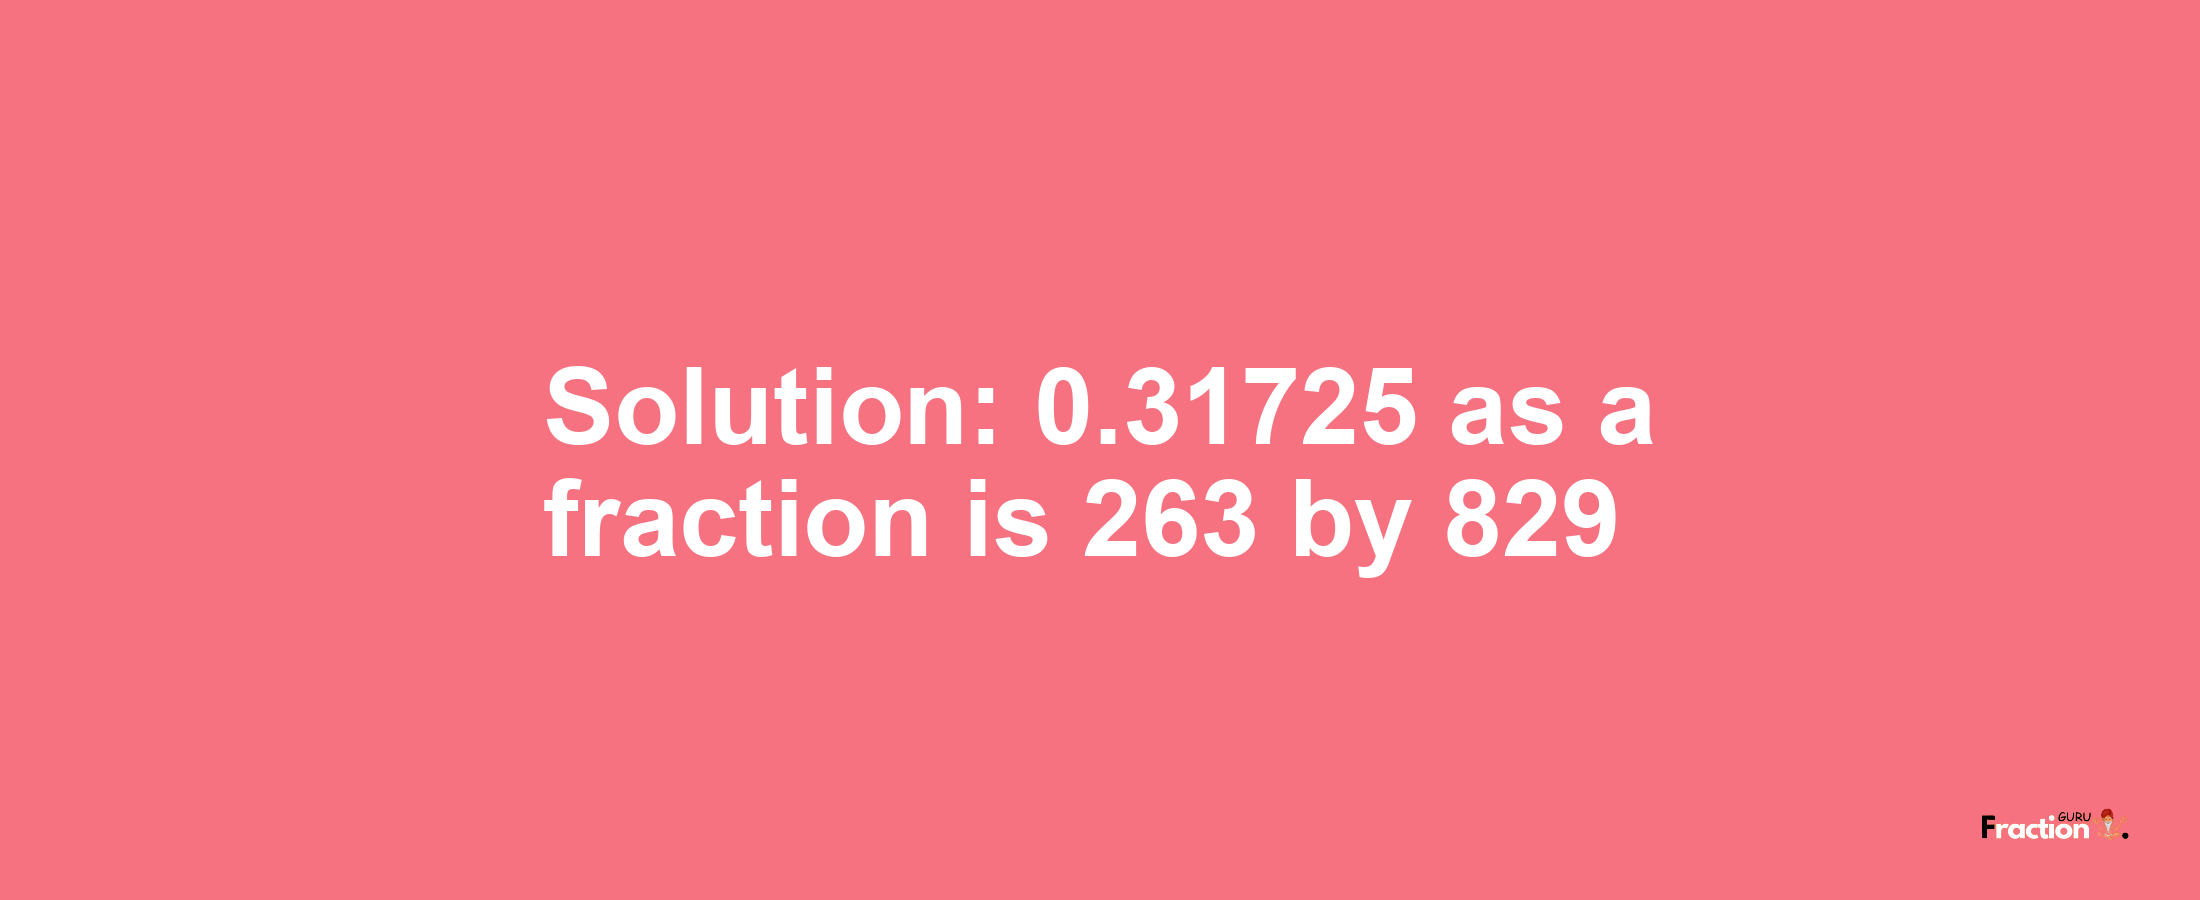 Solution:0.31725 as a fraction is 263/829